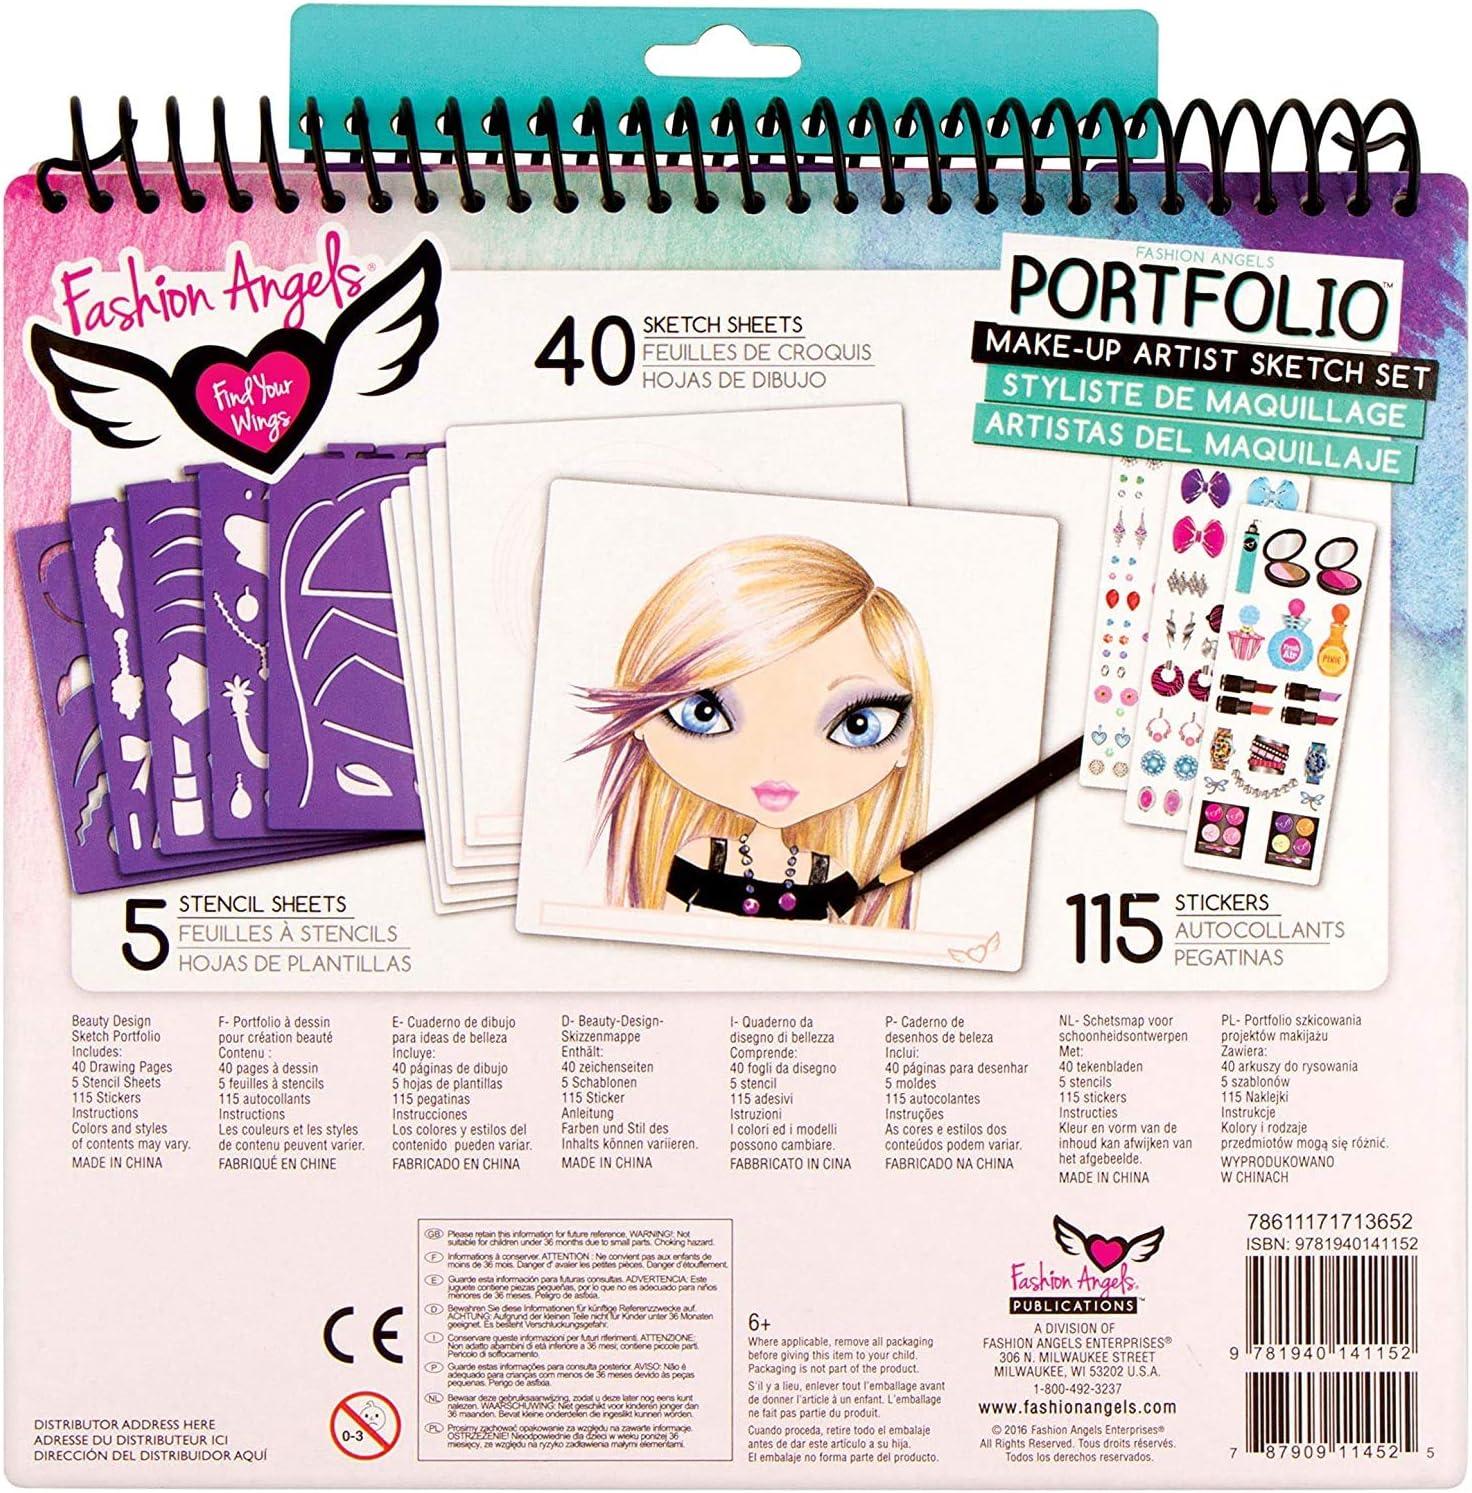 Fashion Angels Make-up & Hair Design Sketch Portfolio (11452) Sketchbook  for Beginners, Sketchbook with Stencils and Stickers for Ages 6 and Up